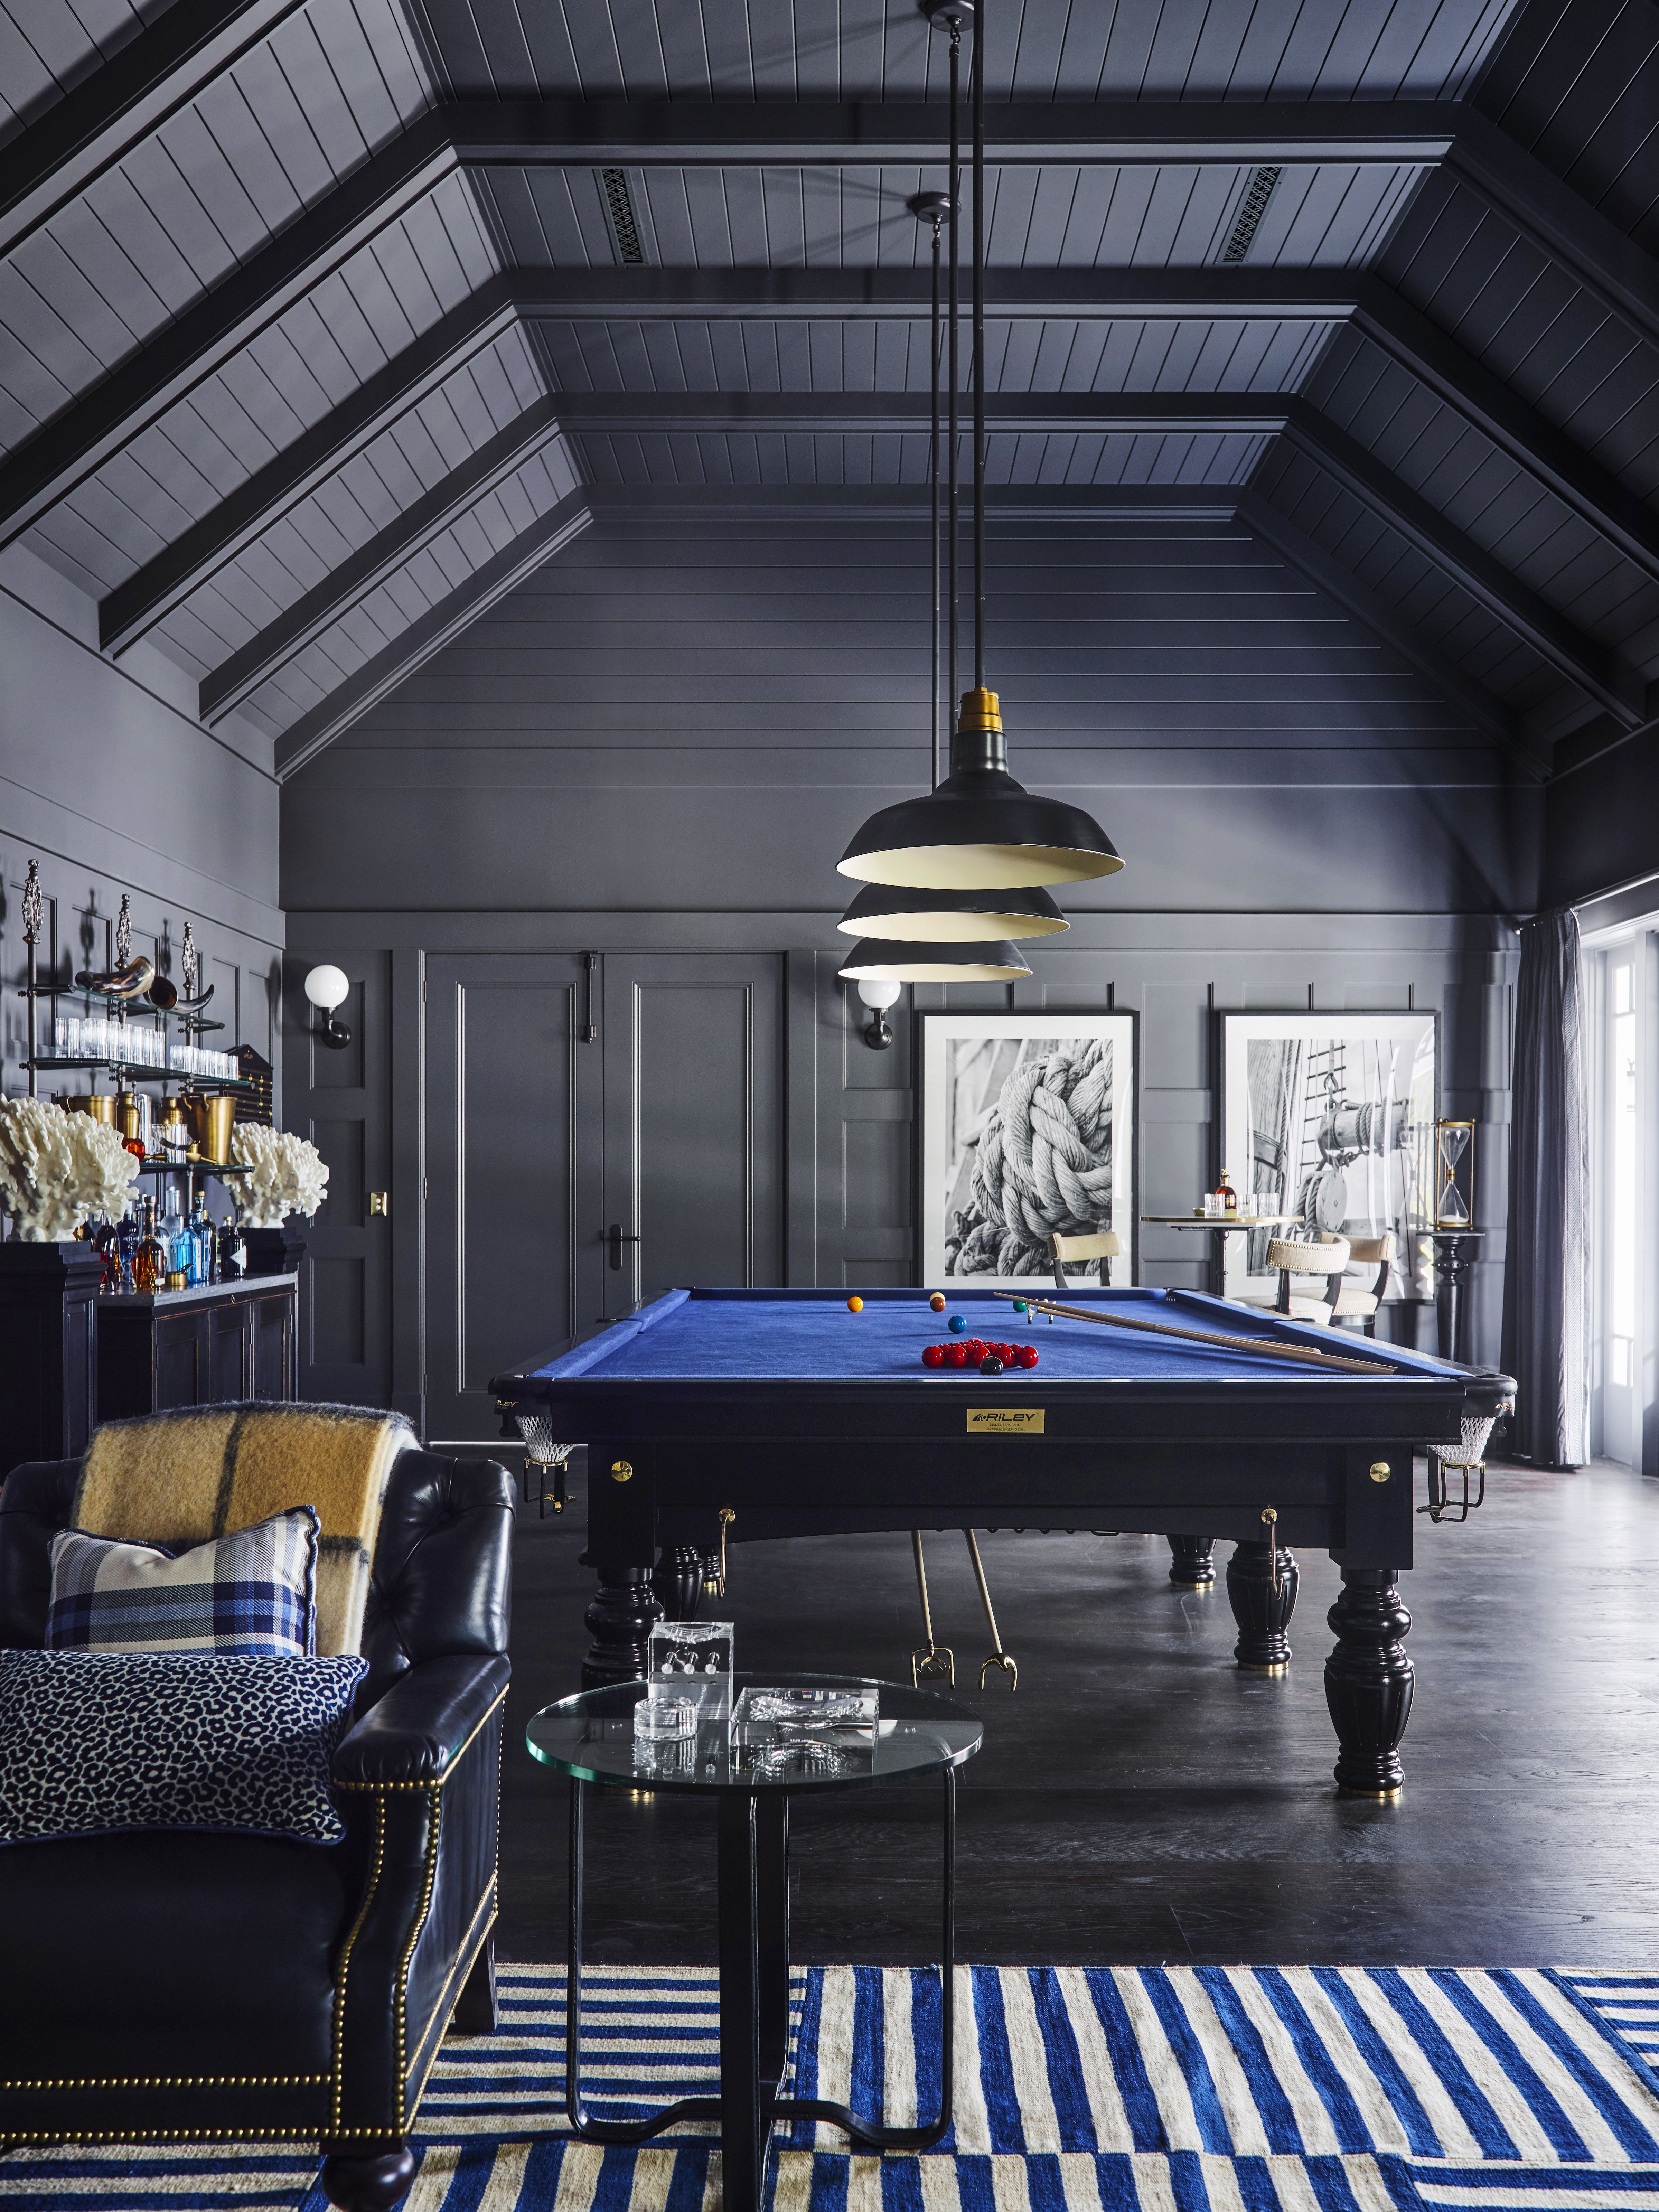 48 Best Game Room Ideas for Home Entertainment in Style